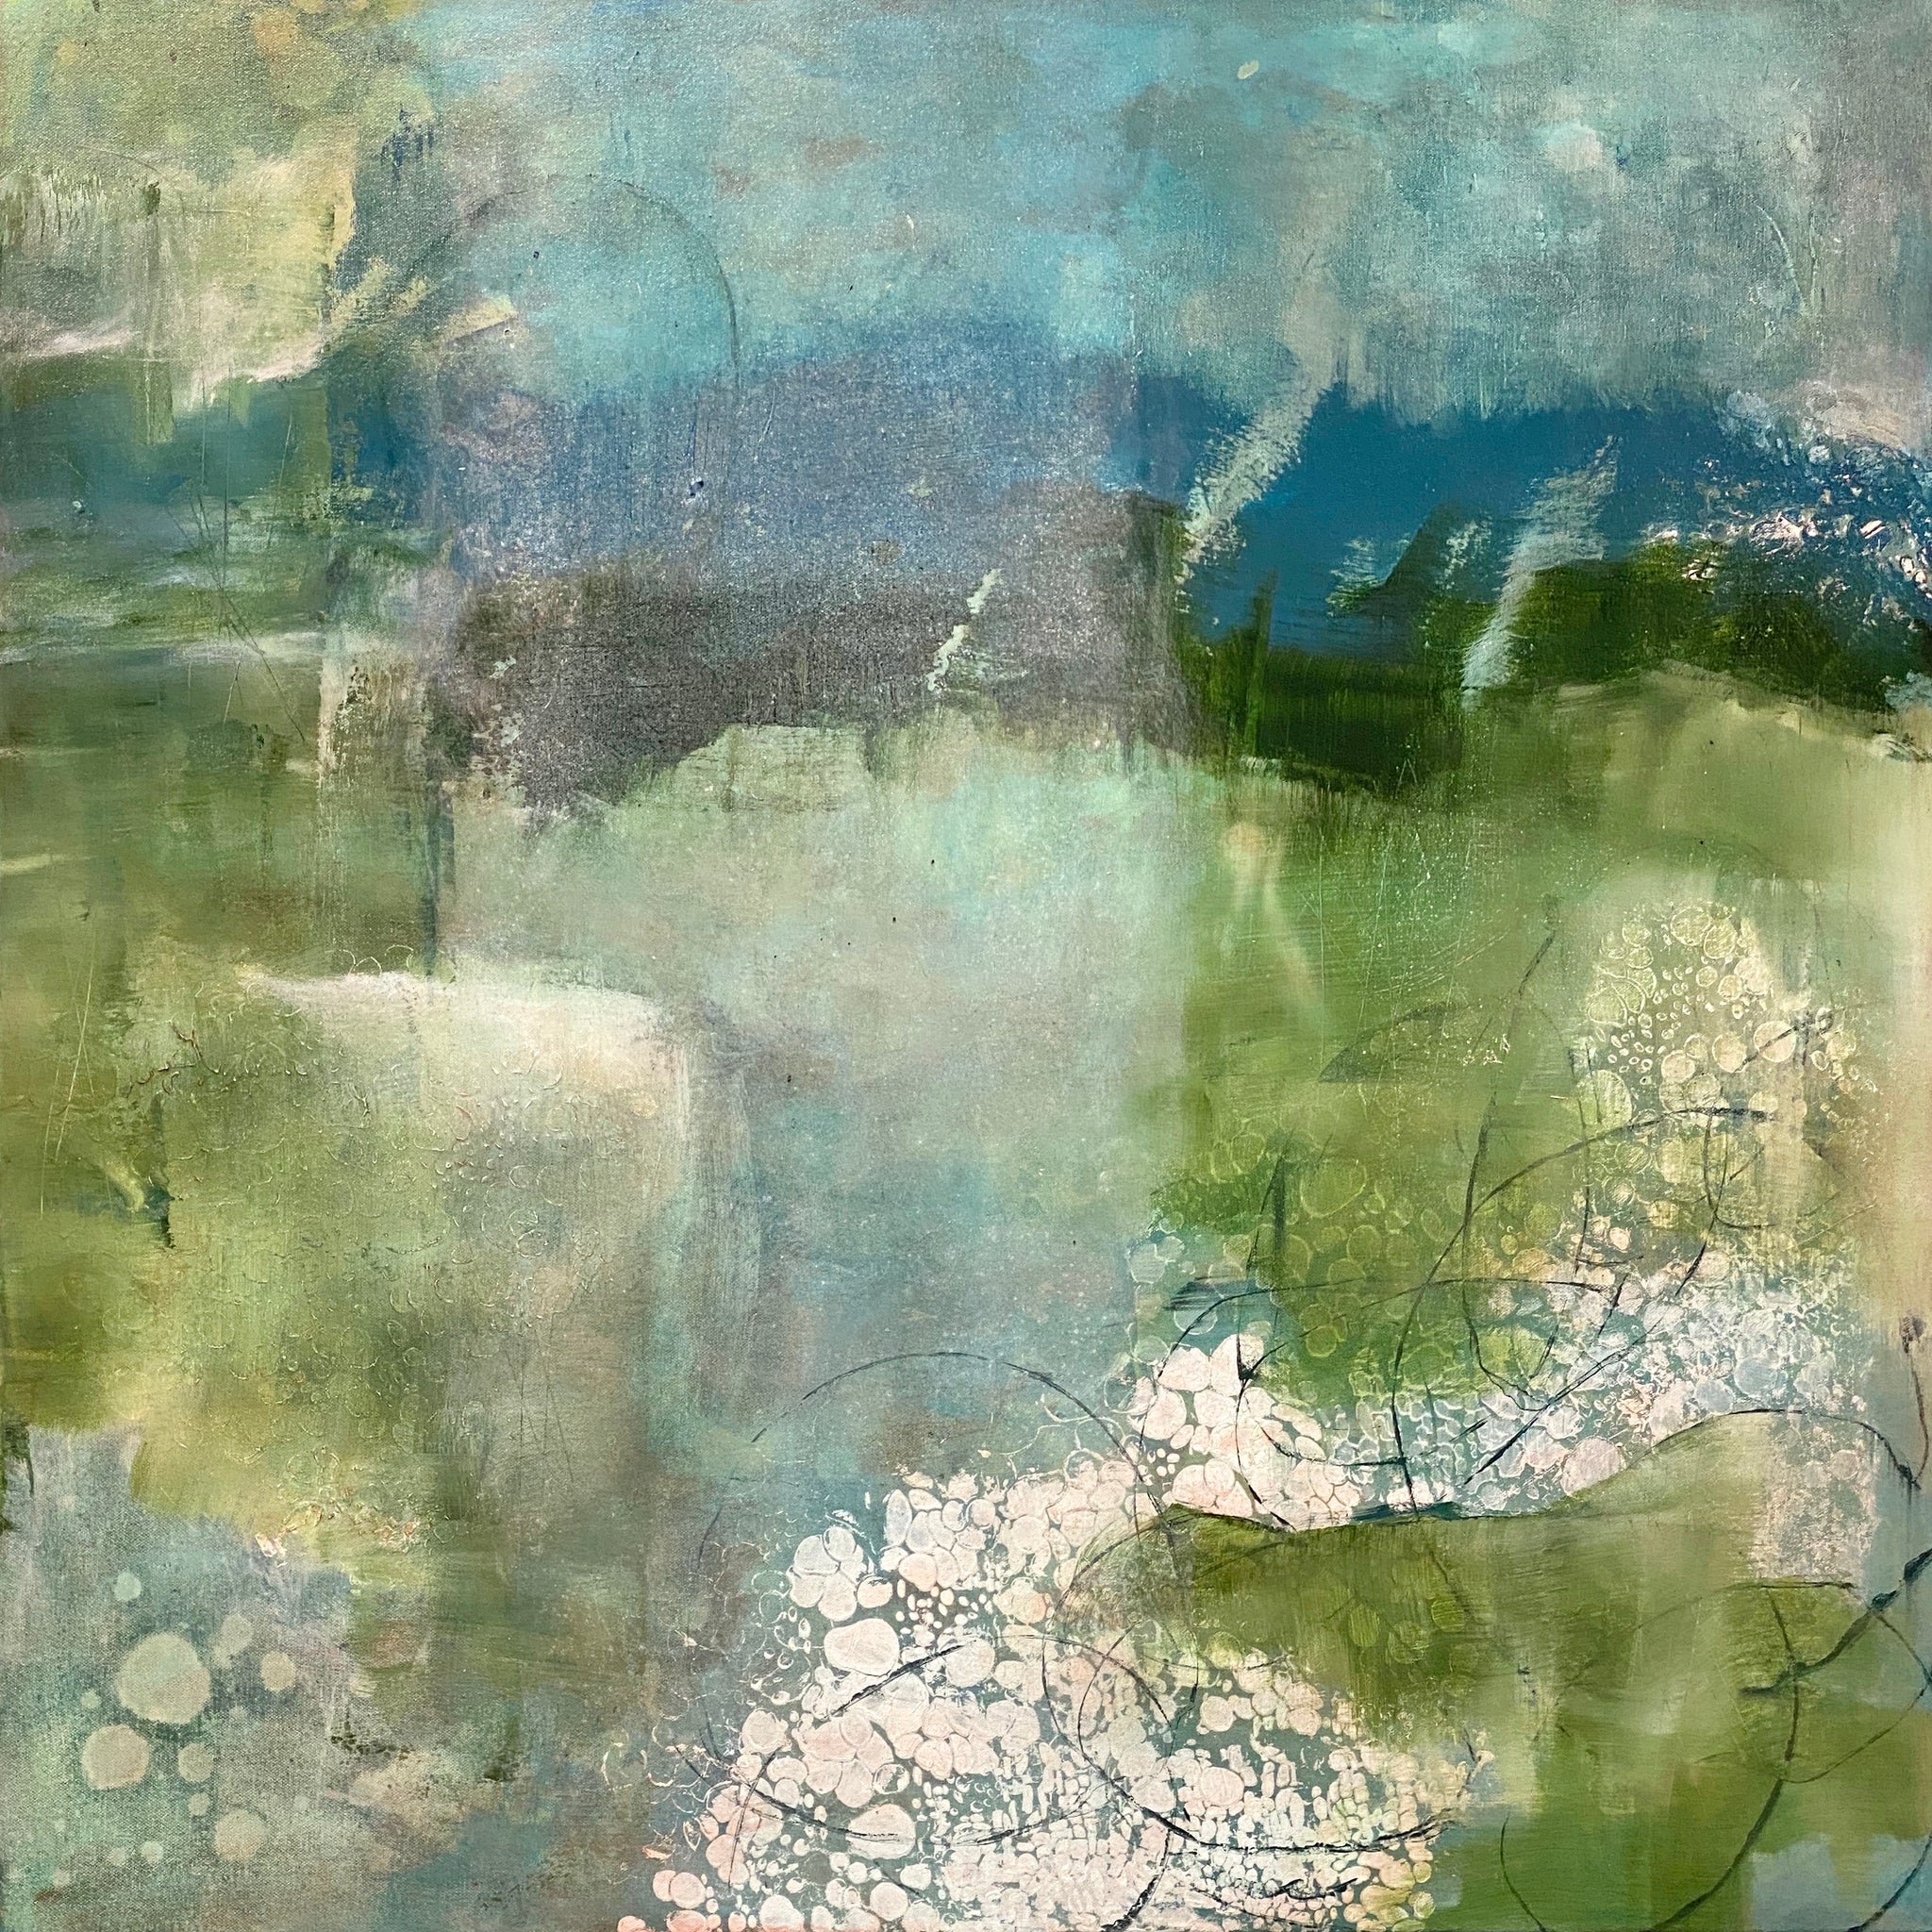 Juanita Bellavance, From the thicket, 2020, Acrylic on canvas, 36 x 36 inches